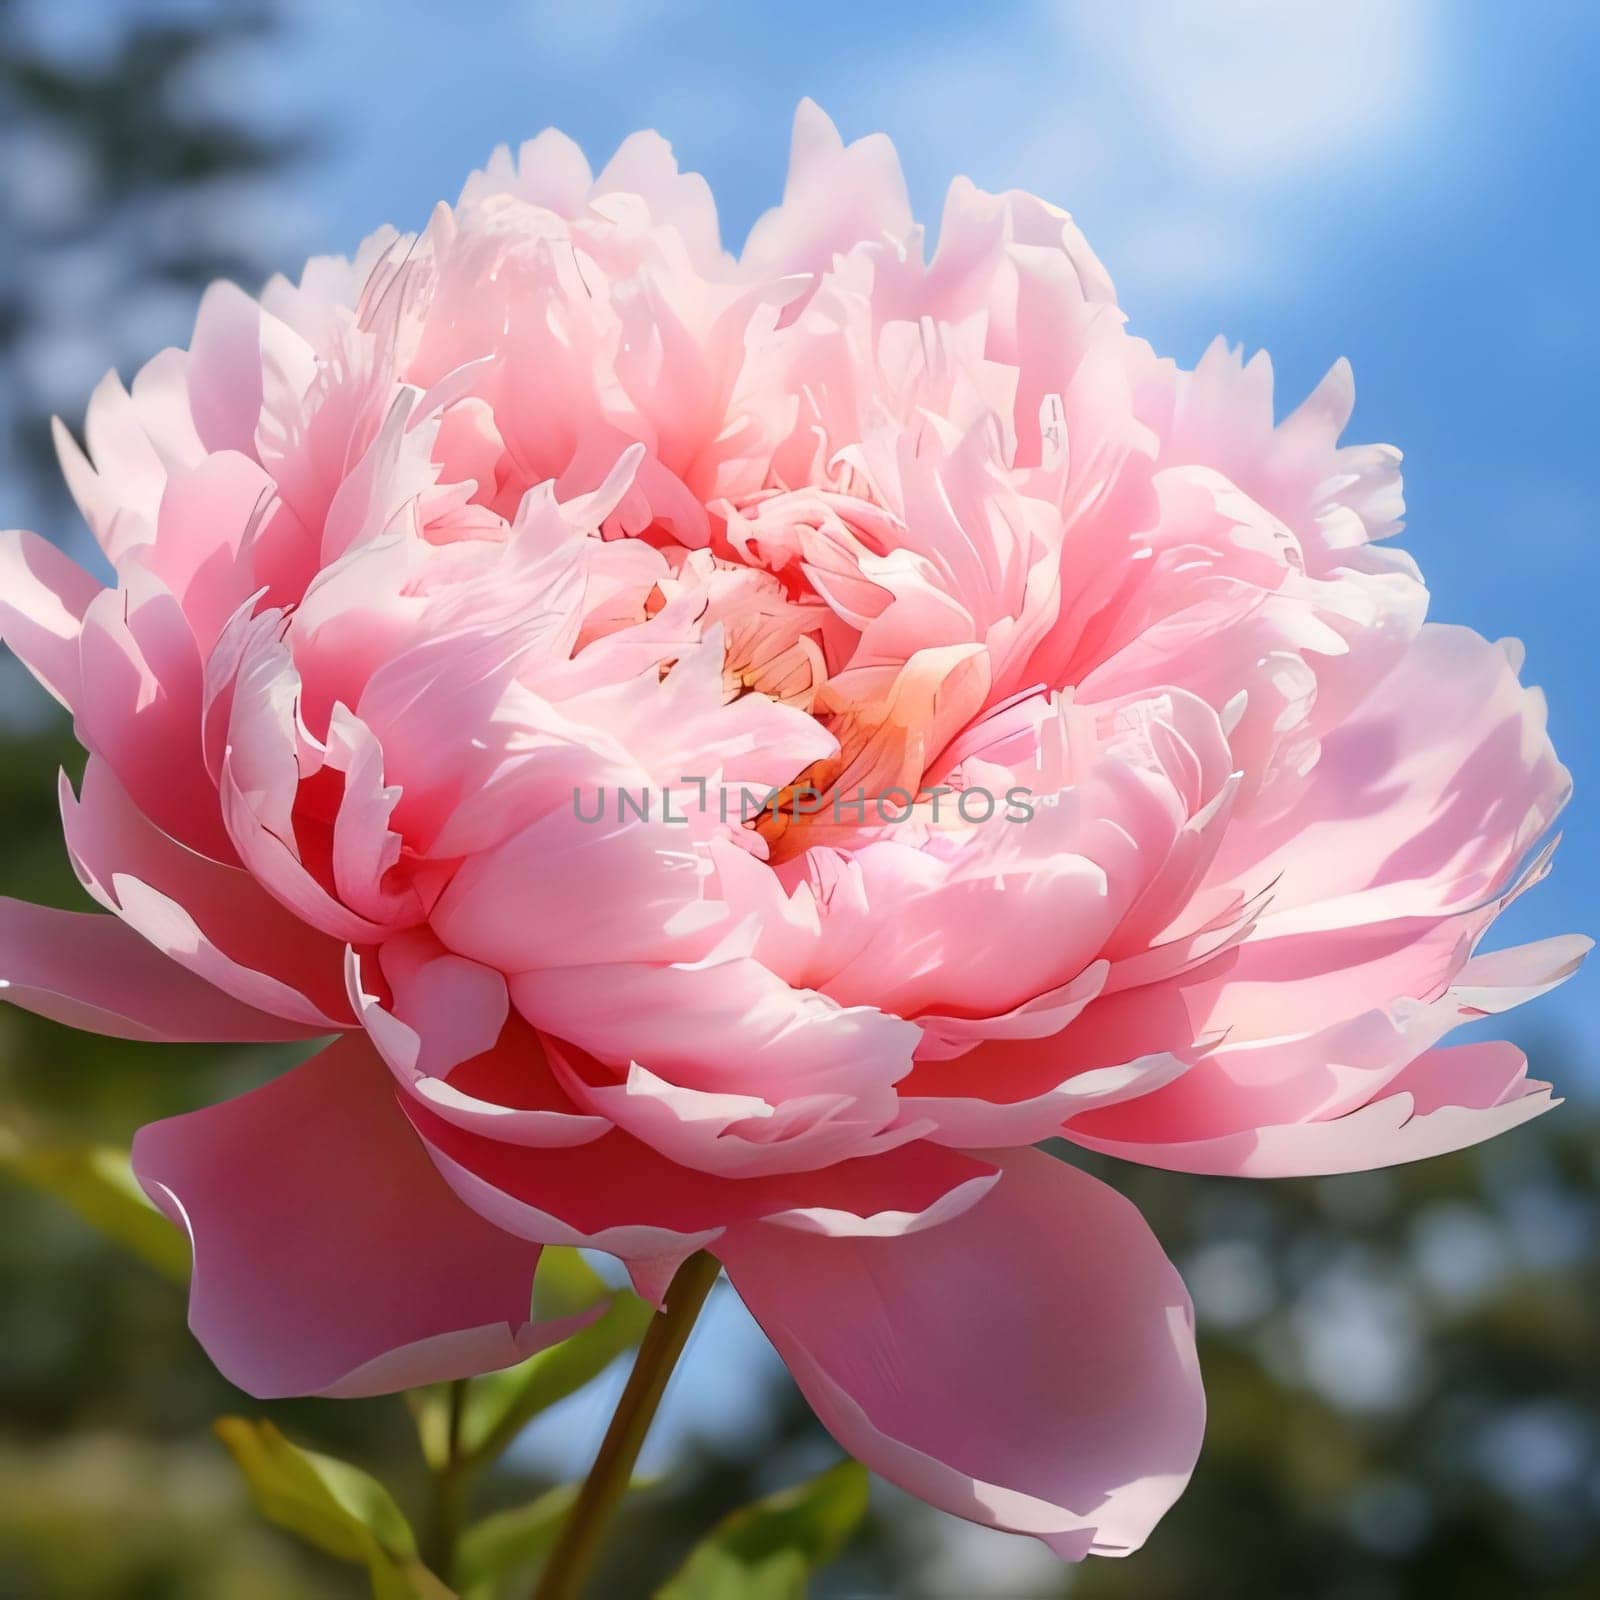 Close-up view of the petals of the peony flower. Flowering flowers, a symbol of spring, new life. A joyful time of nature waking up to life.